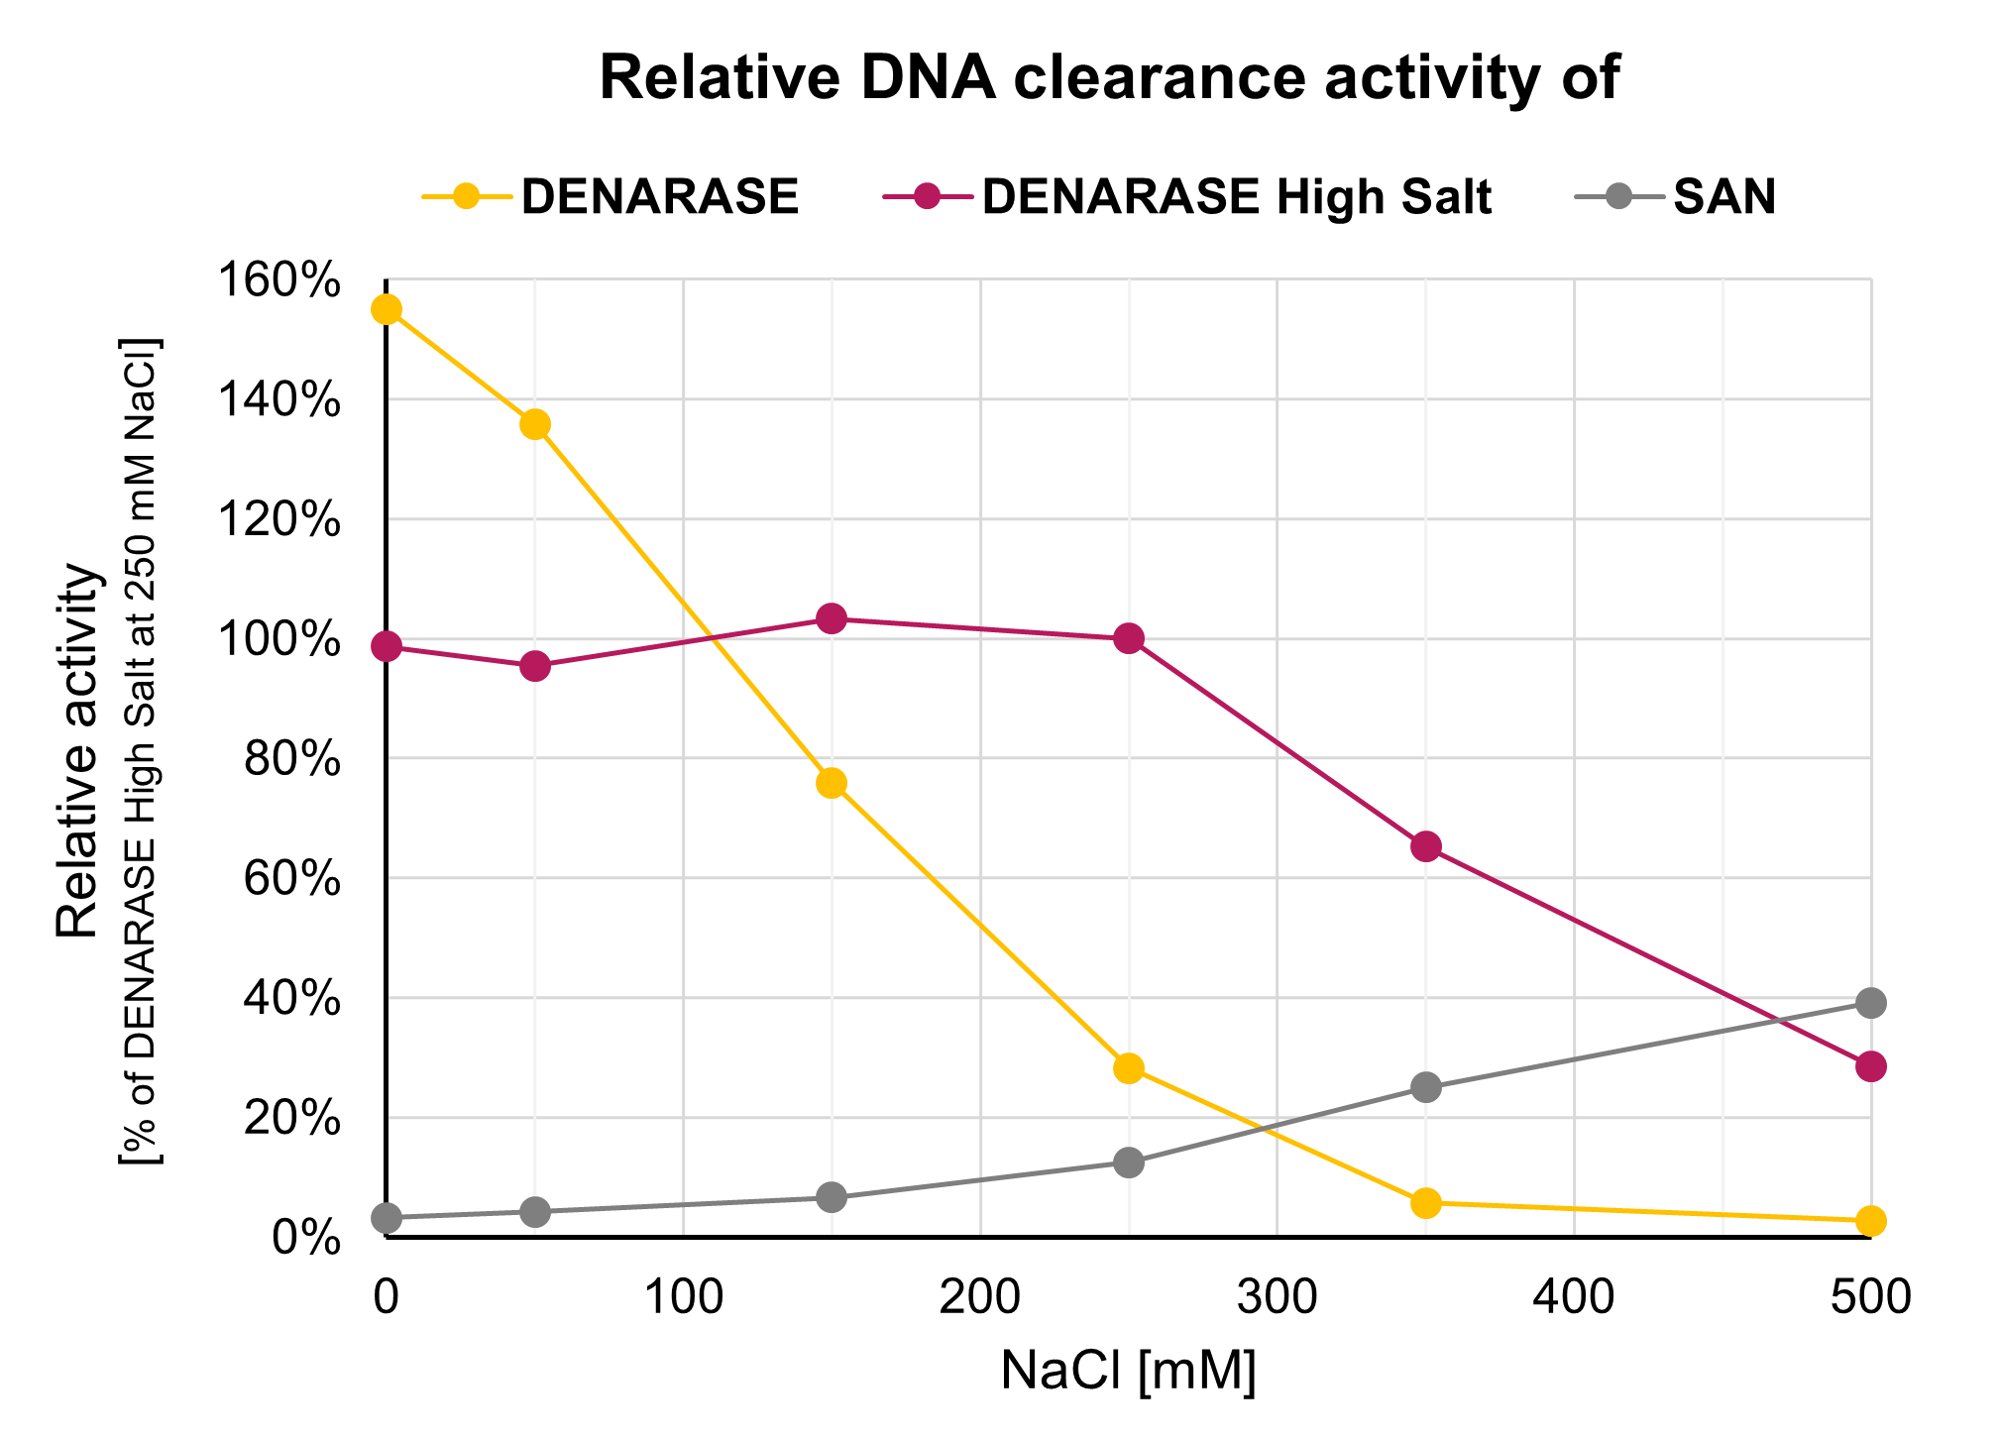 Relative DNA clearance compared to others